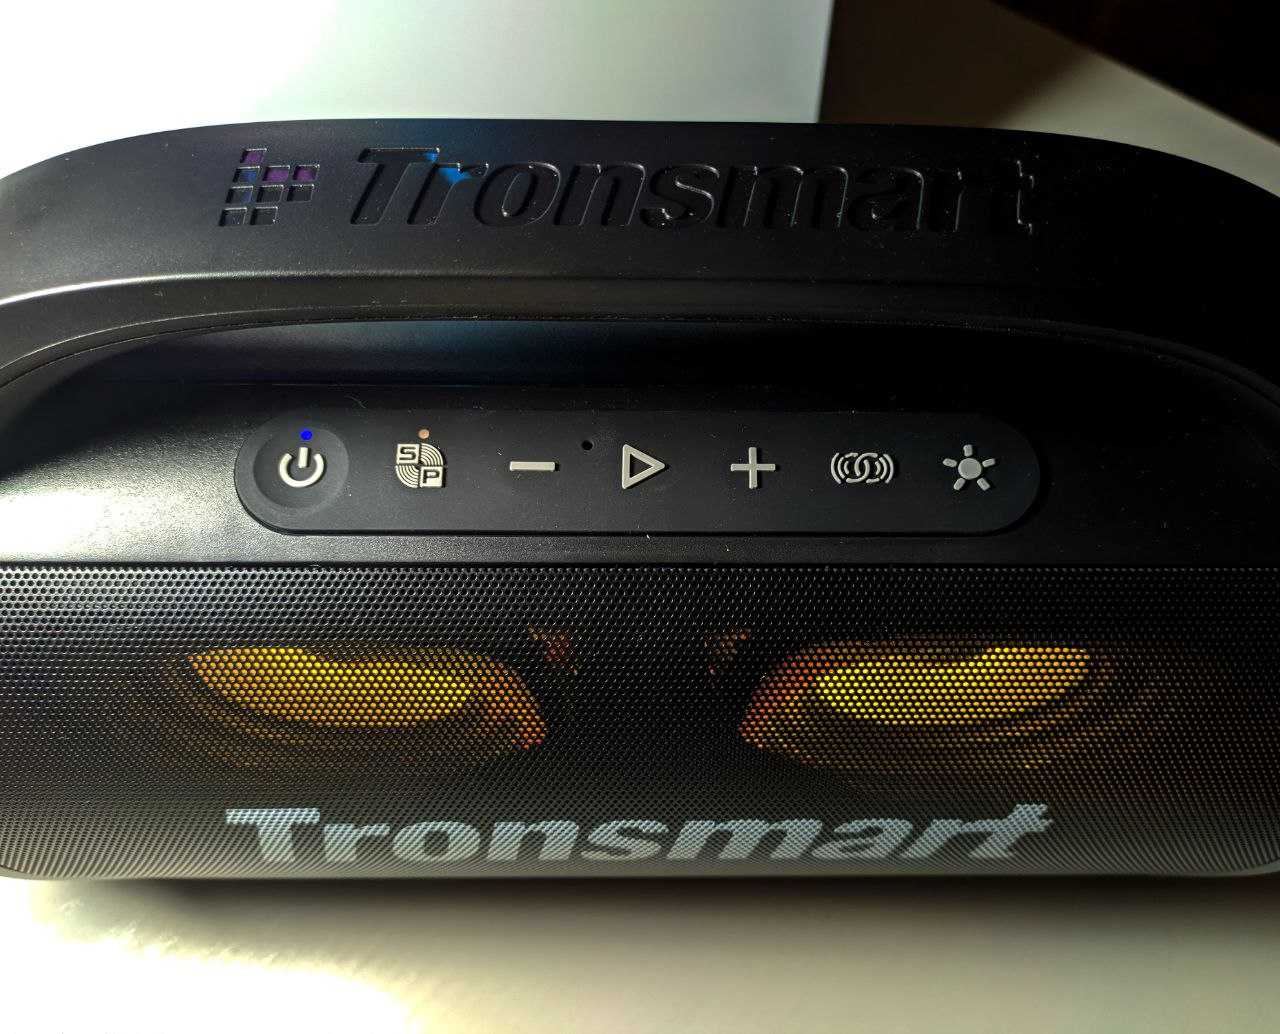 Tronsmart Bang SE review: the life of the party